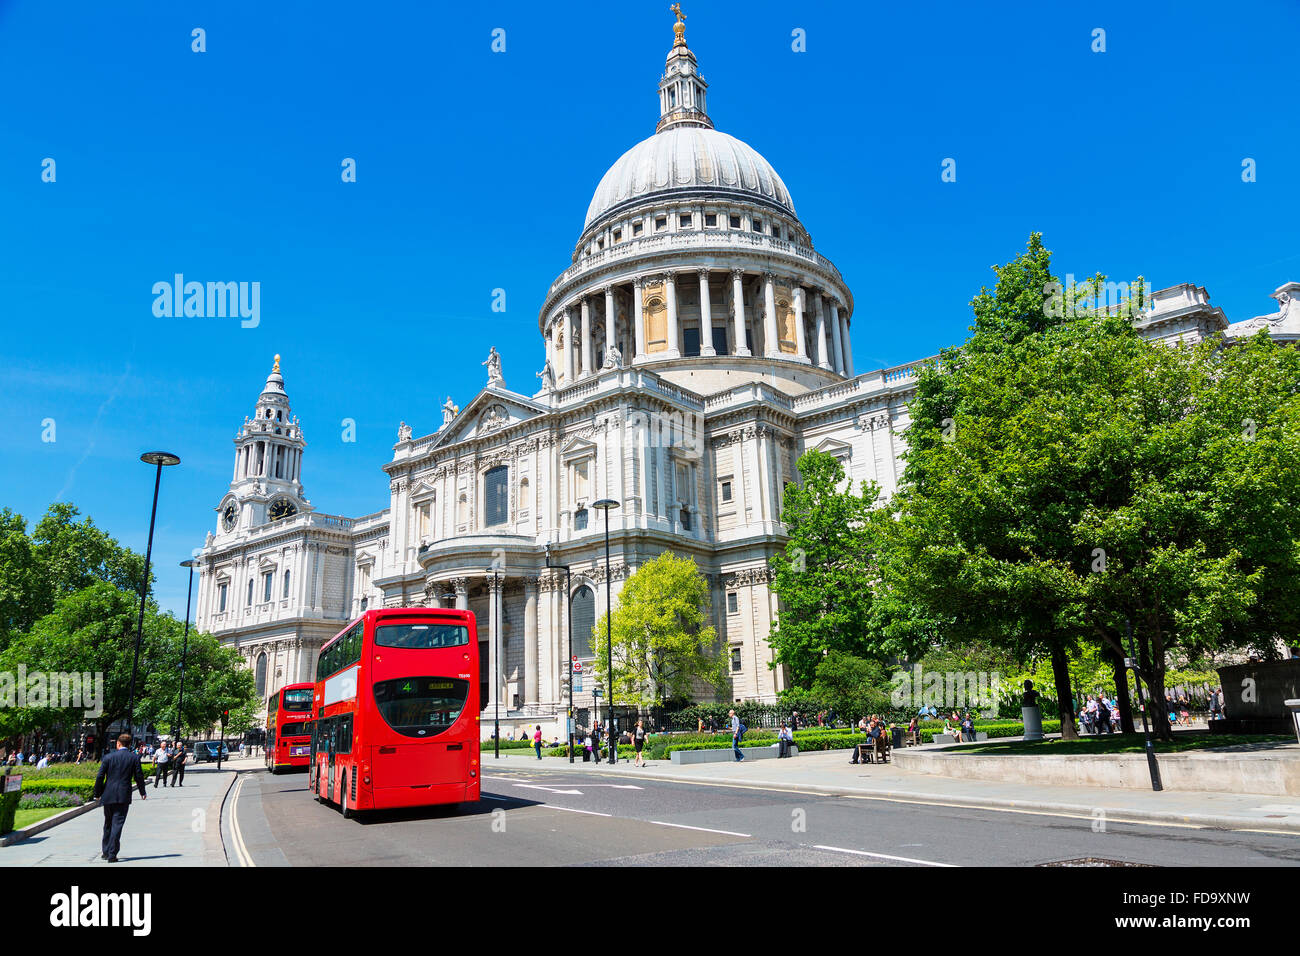 Sunny day on St Paul's cathedral. Stock Photo